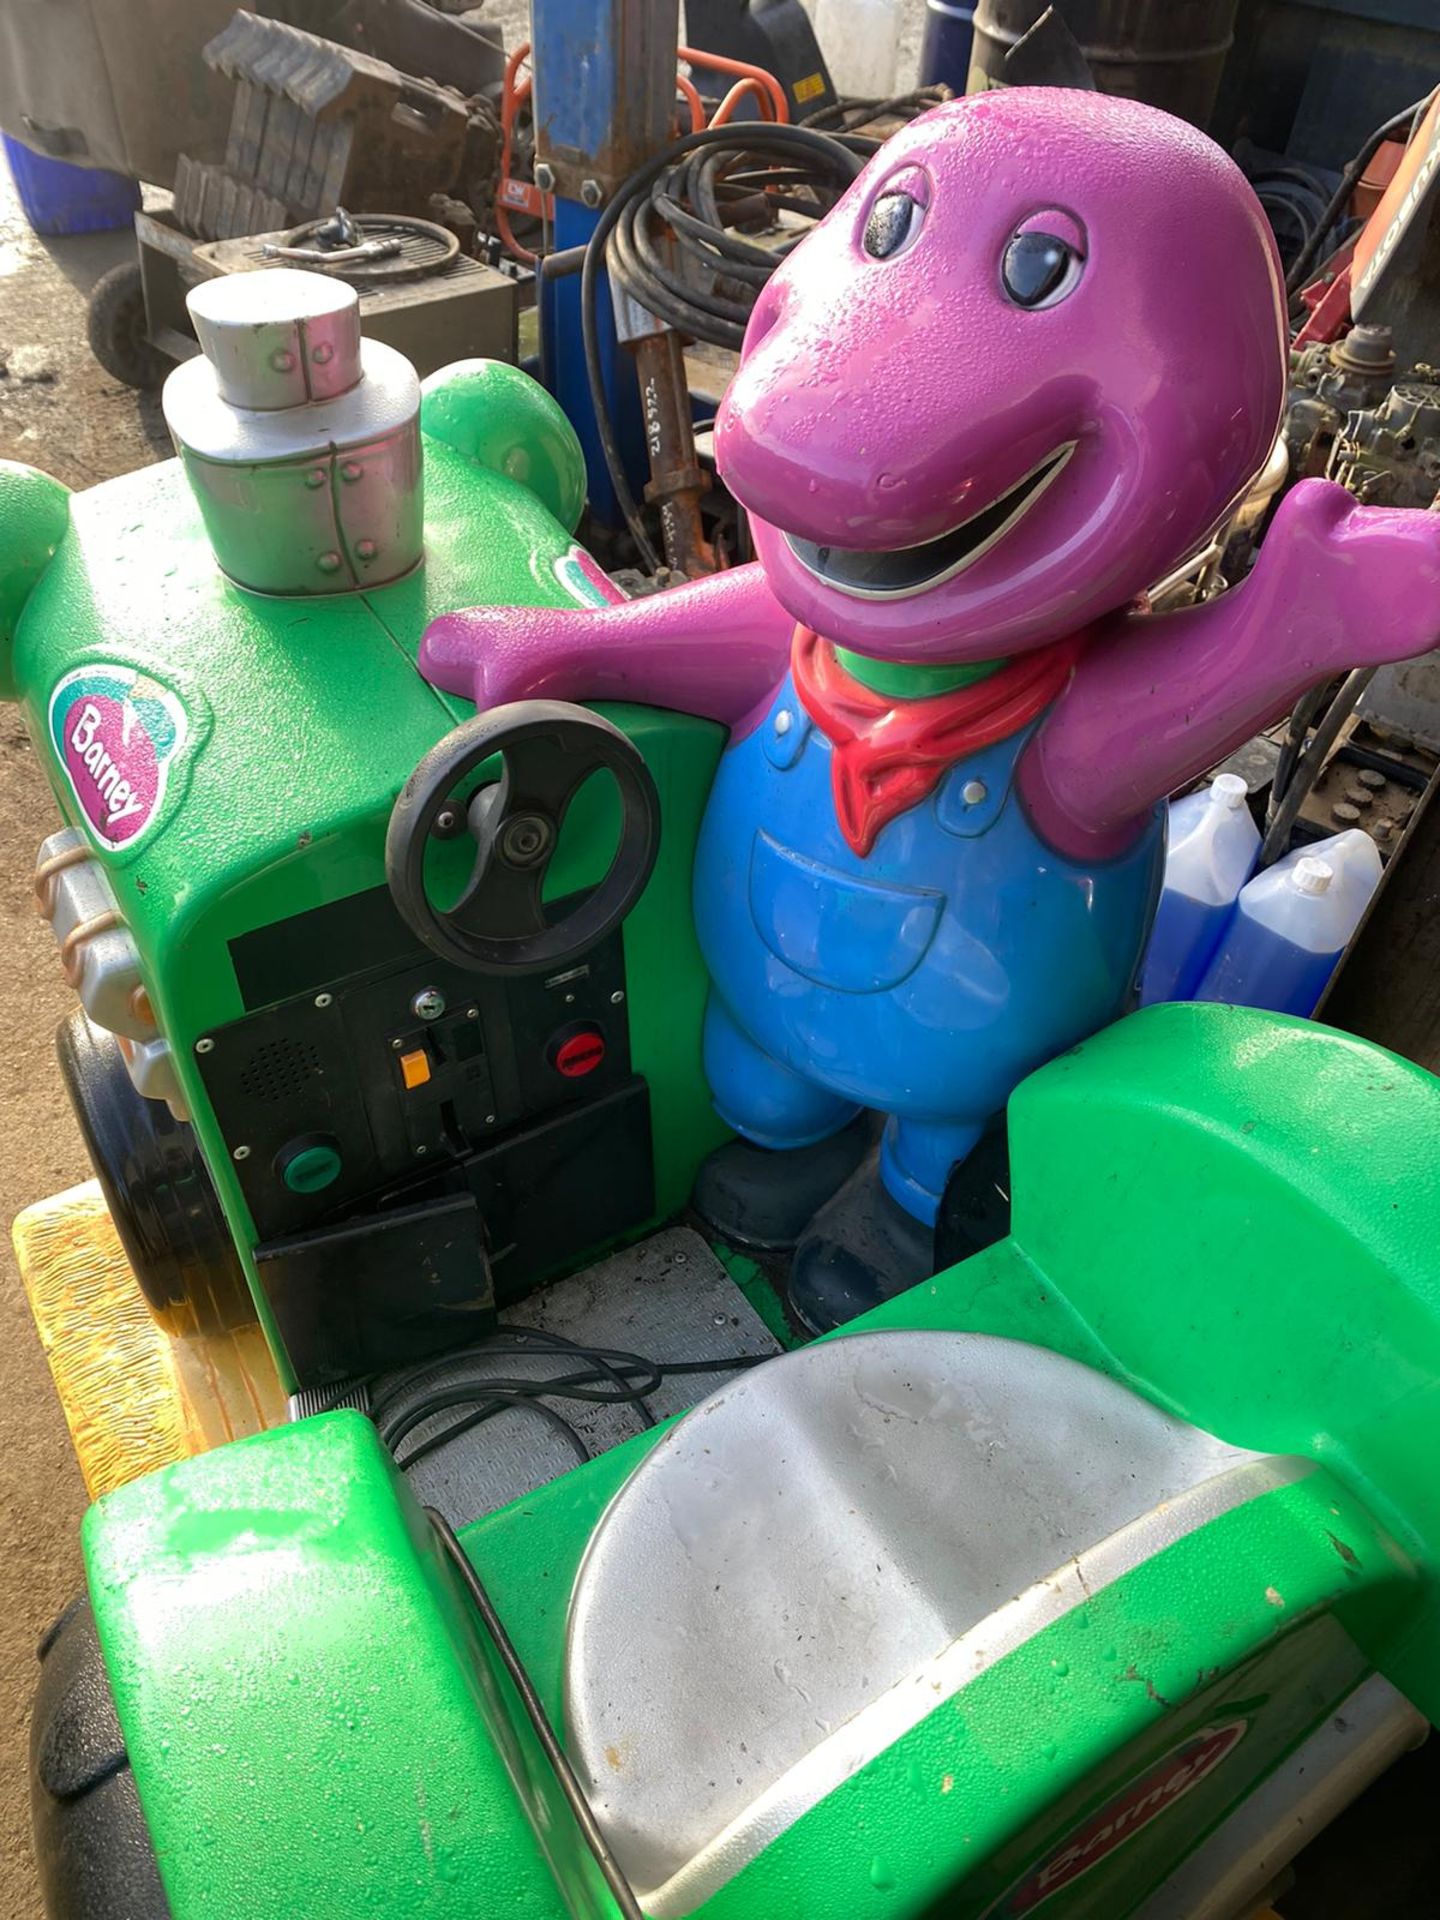 BARNEY KIDS COIN RIDE, 1 POUND TO PLAY, WORKING CONDITION *PLUS VAT* - Image 2 of 5